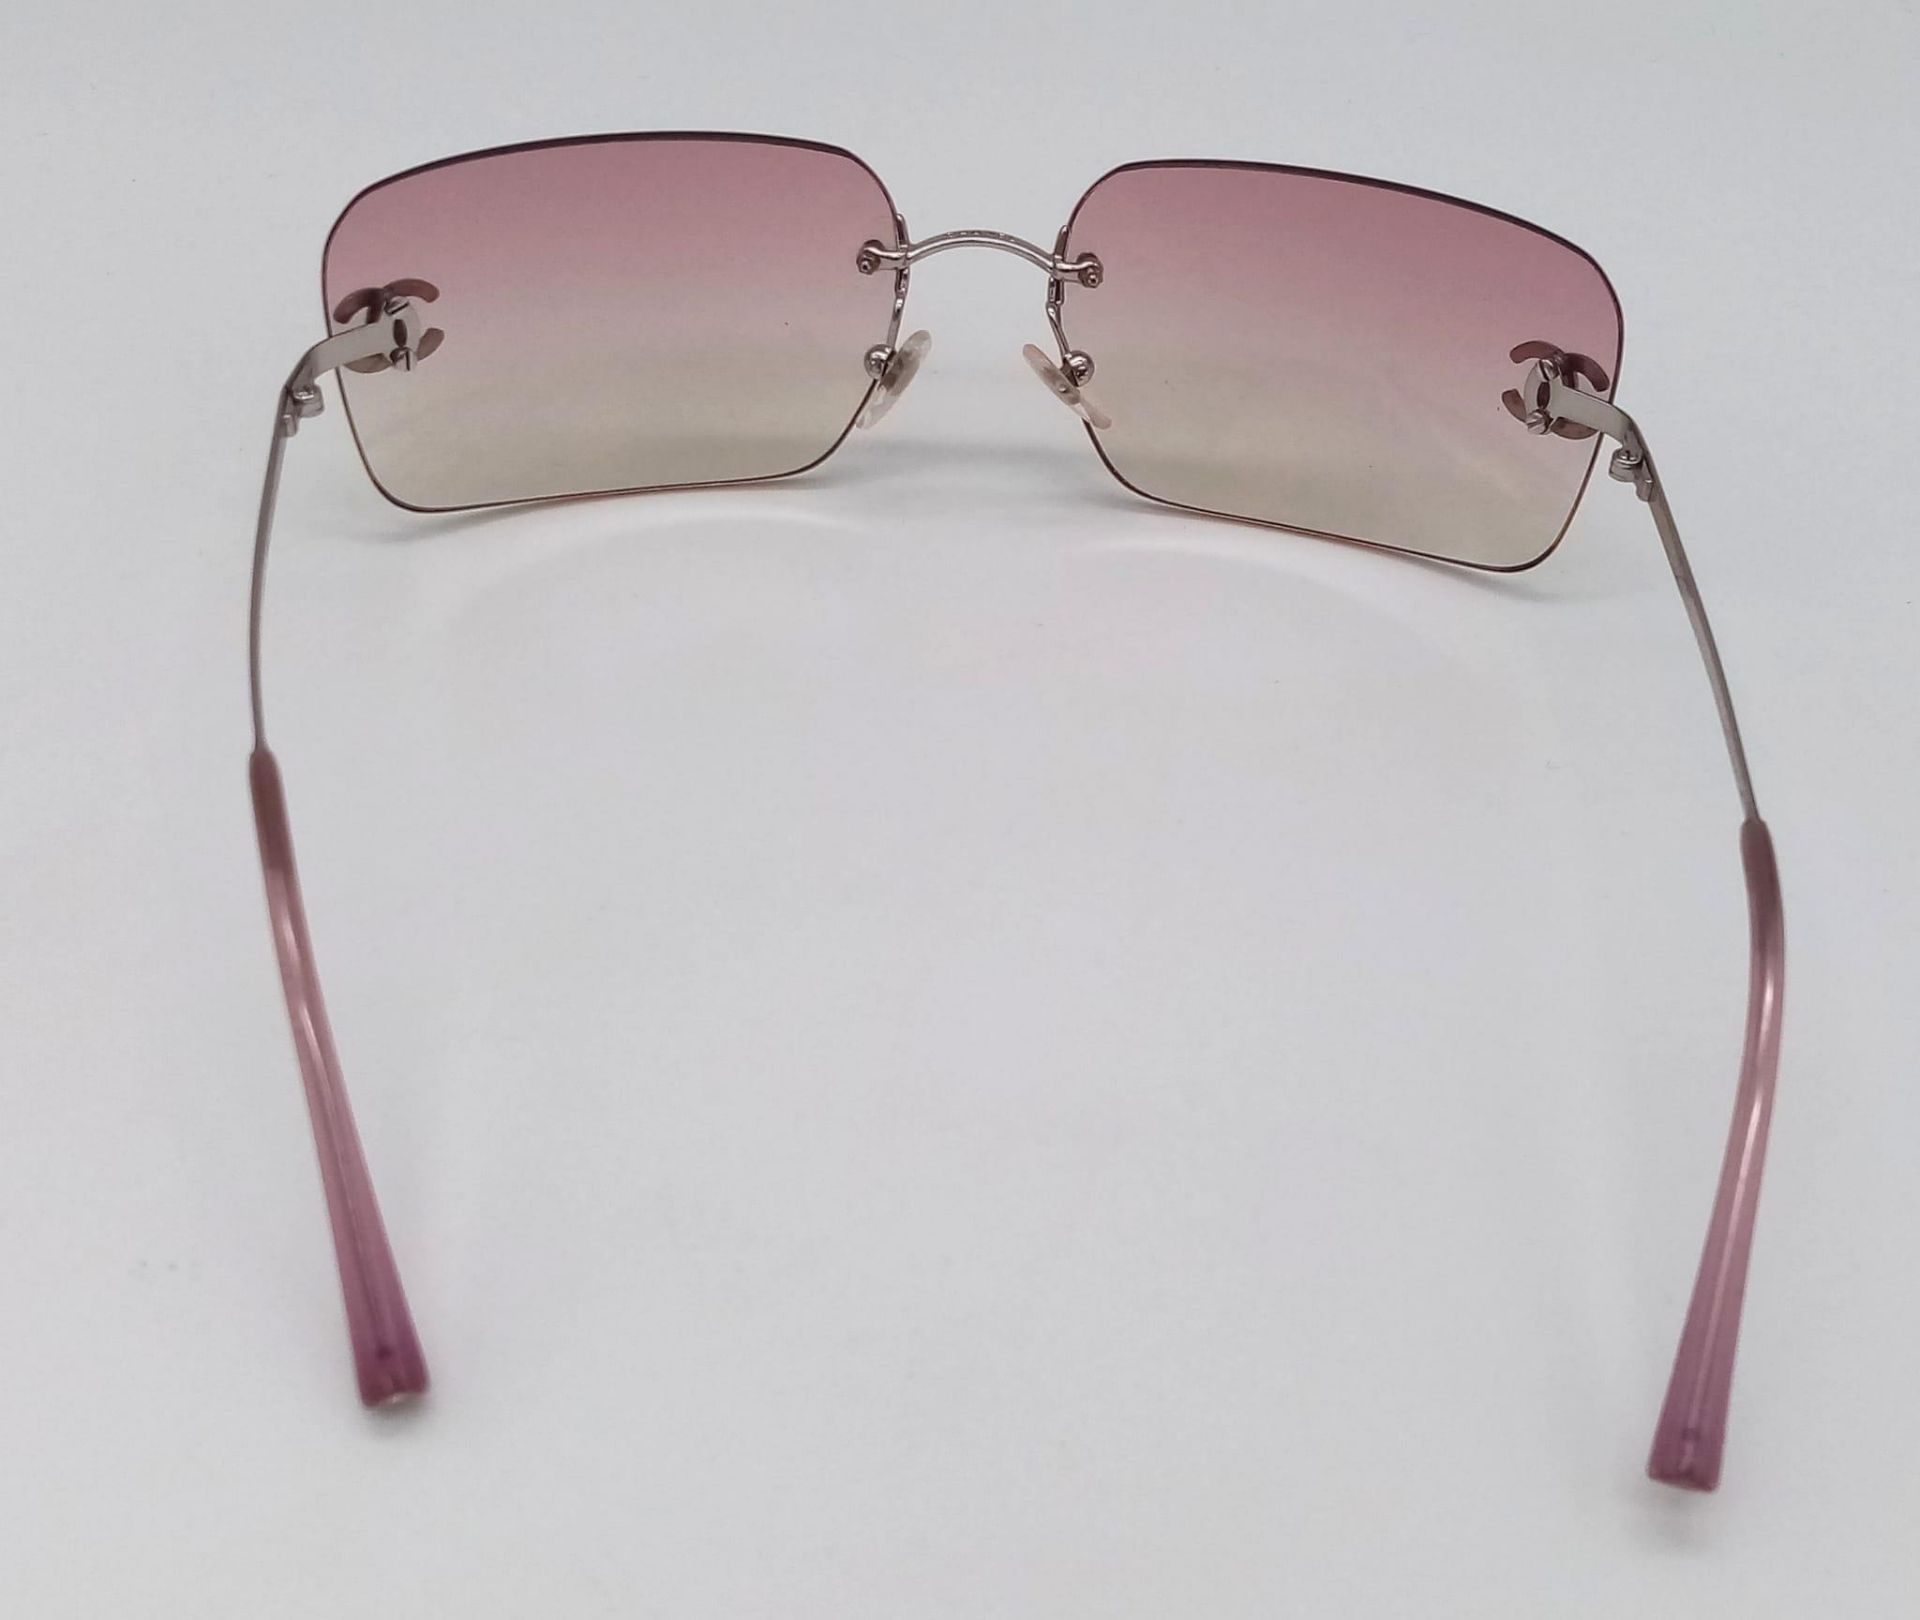 A Pair of Ladies Chanel Sunglasses with Chanel Case. Glasses in good condition - case is worn. - Bild 2 aus 6